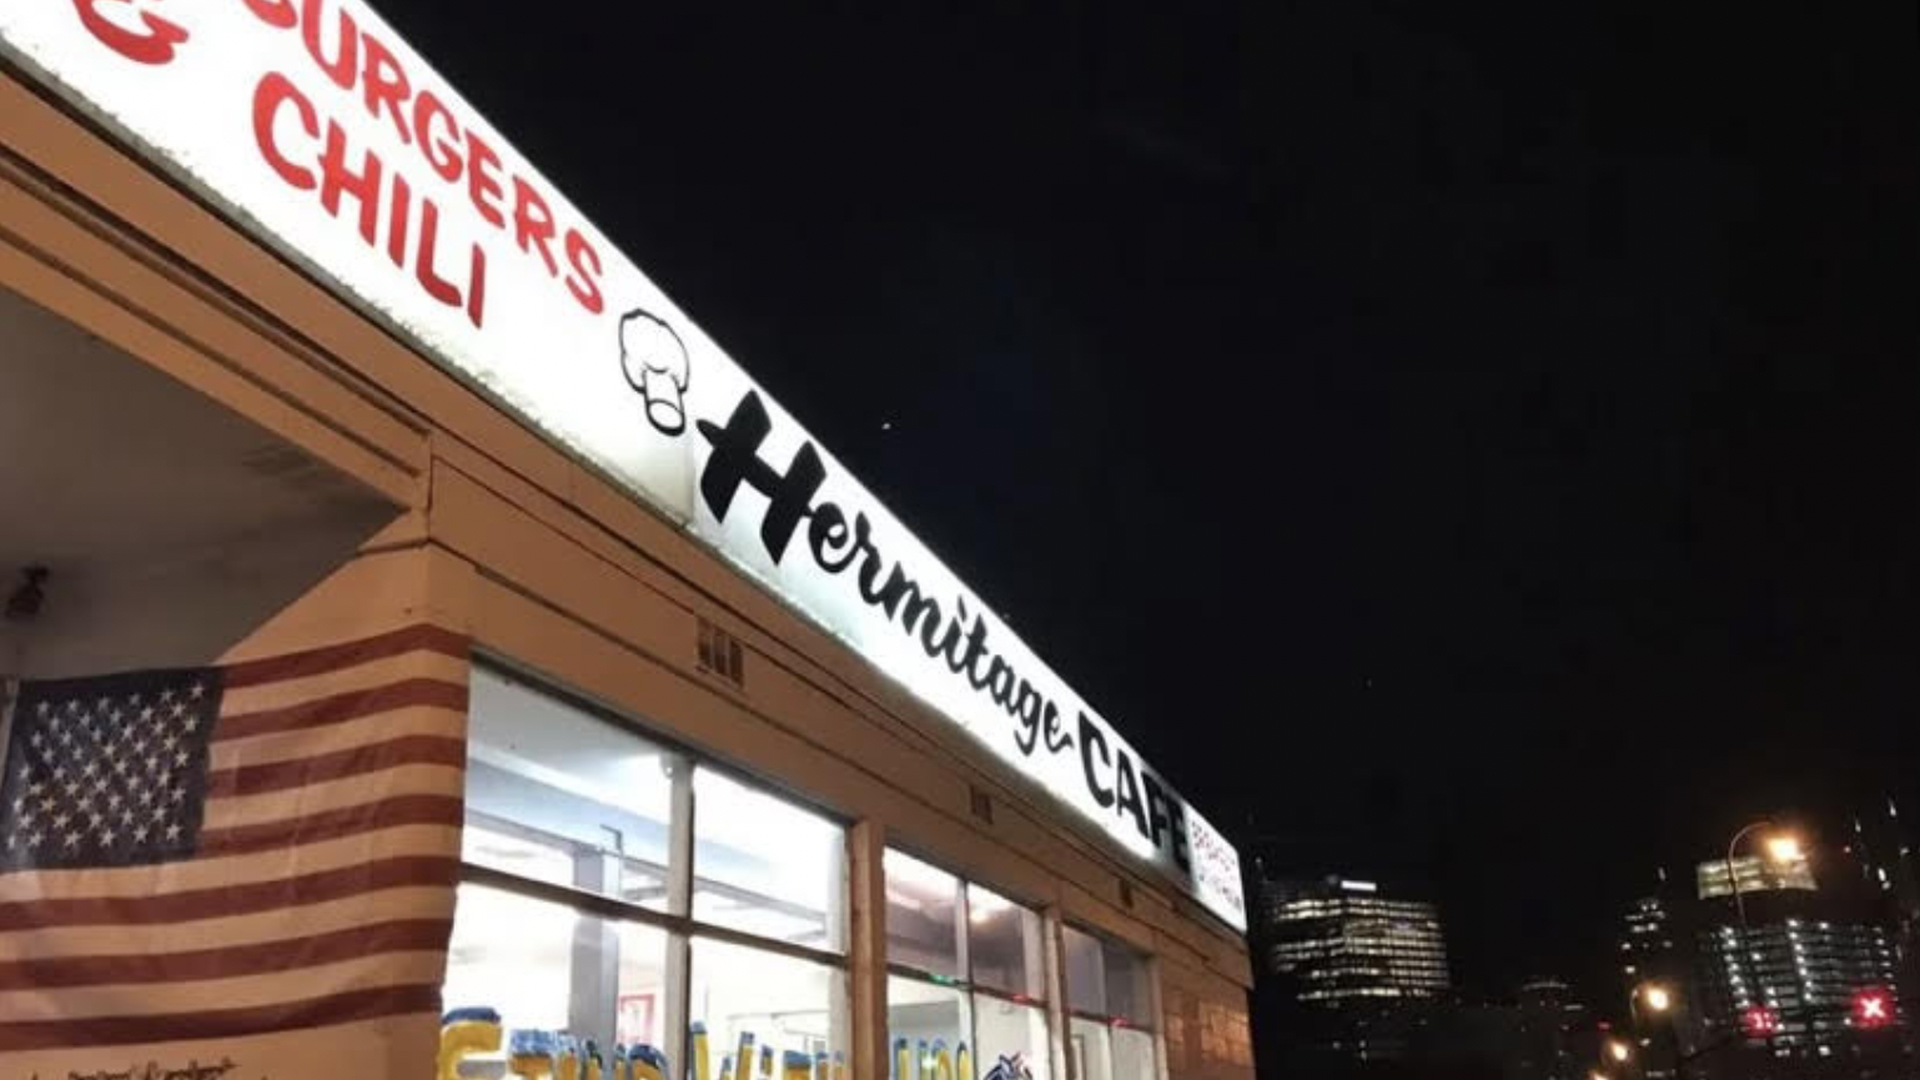 Hermitage Cafe's bright sign lit up at night.